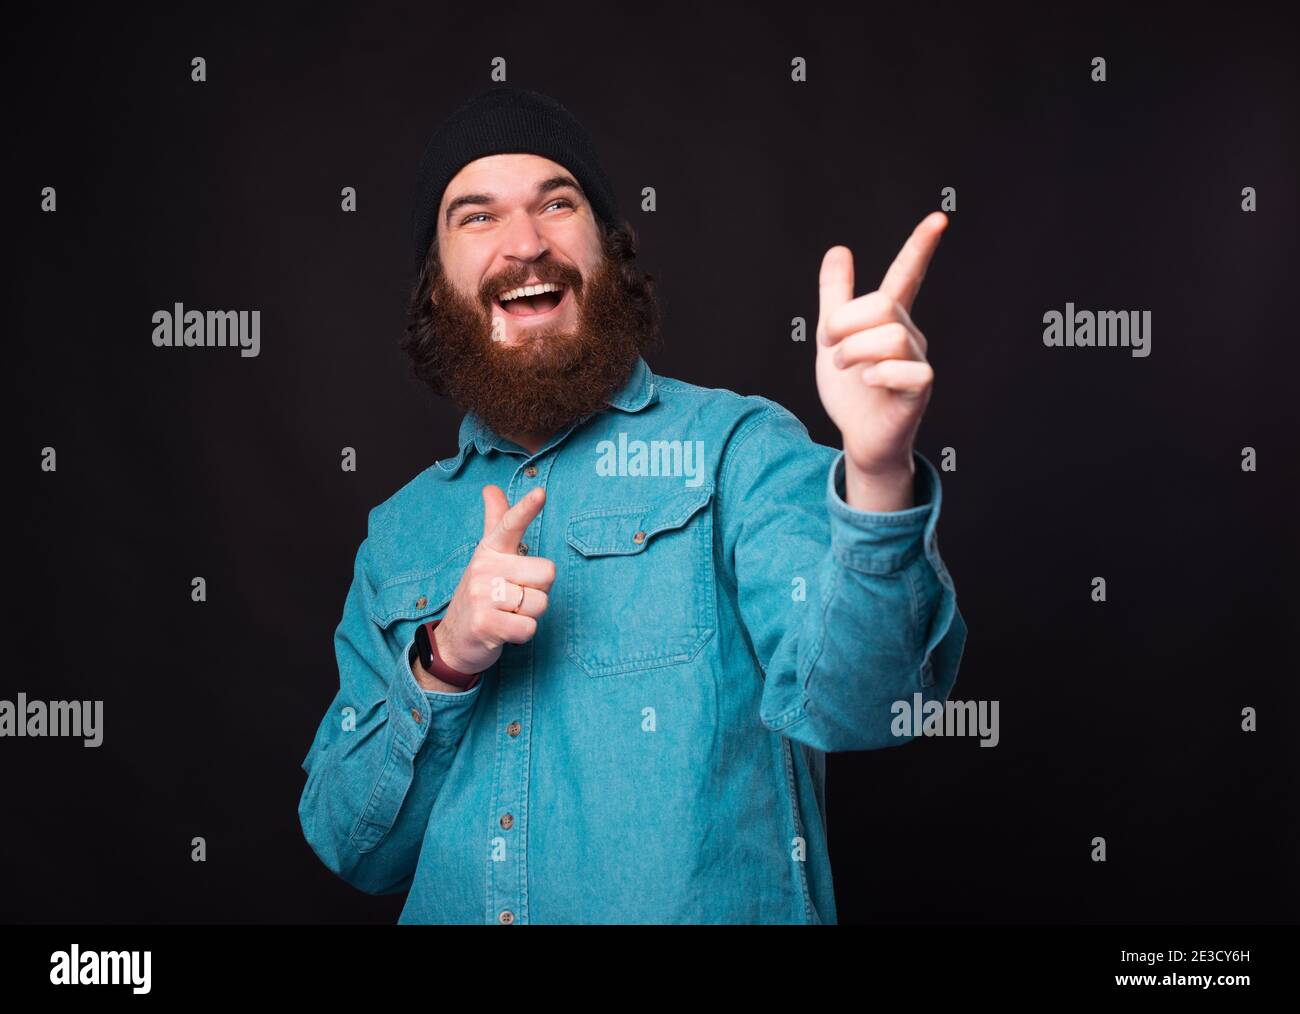 Cheerful bearded hipster man pointing away over dark background. Stock Photo